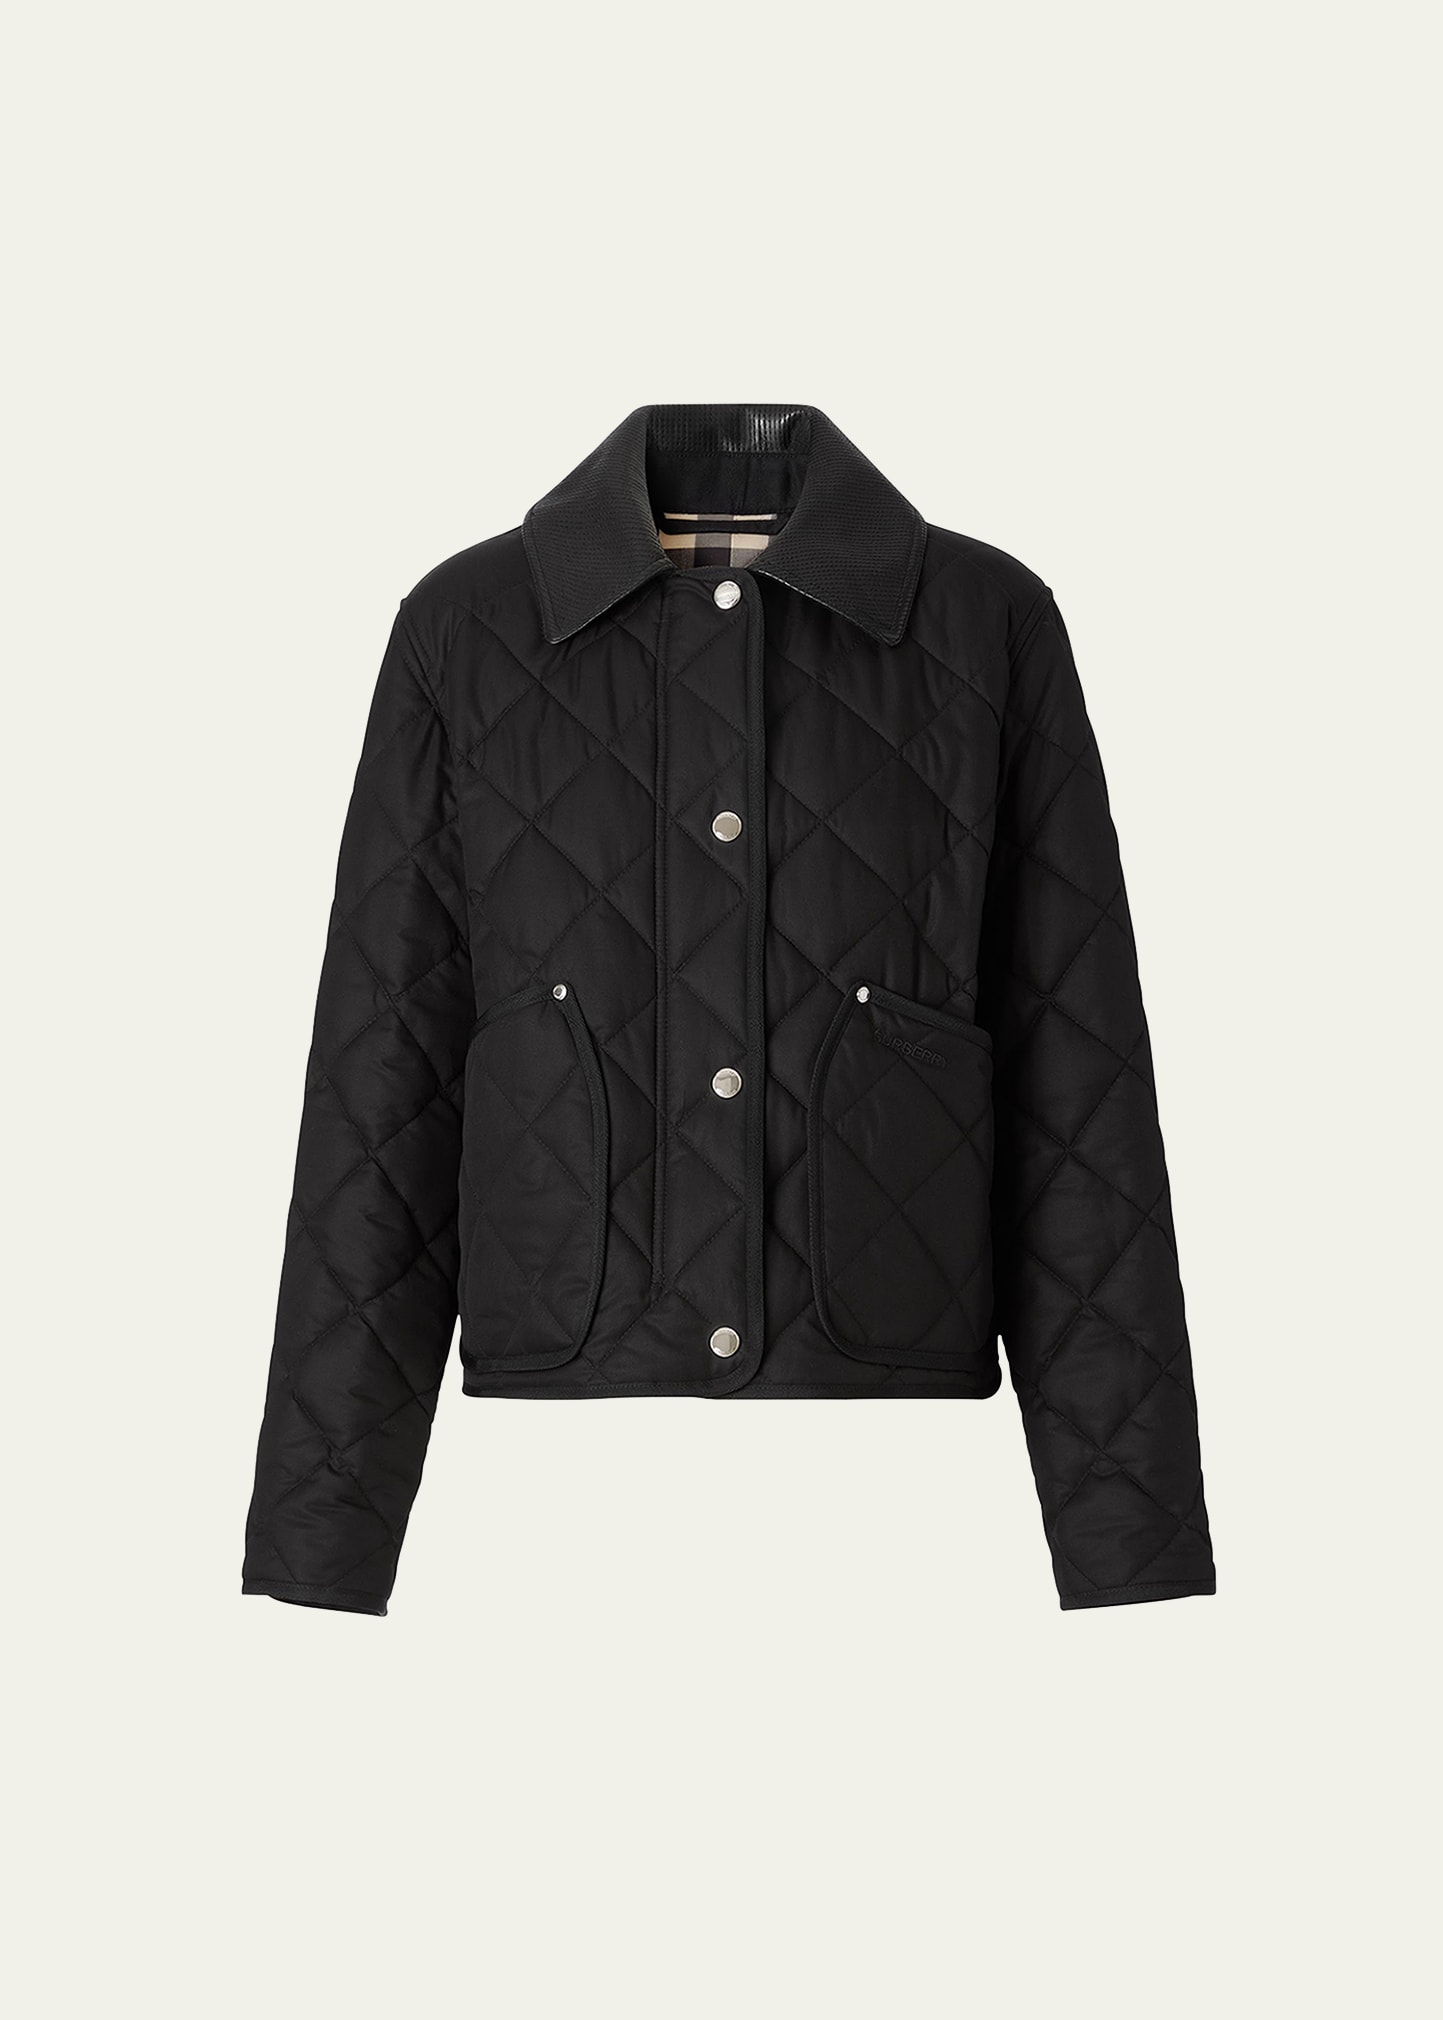 Burberry Lanford Quilted Shirt Jacket with Leather Collar